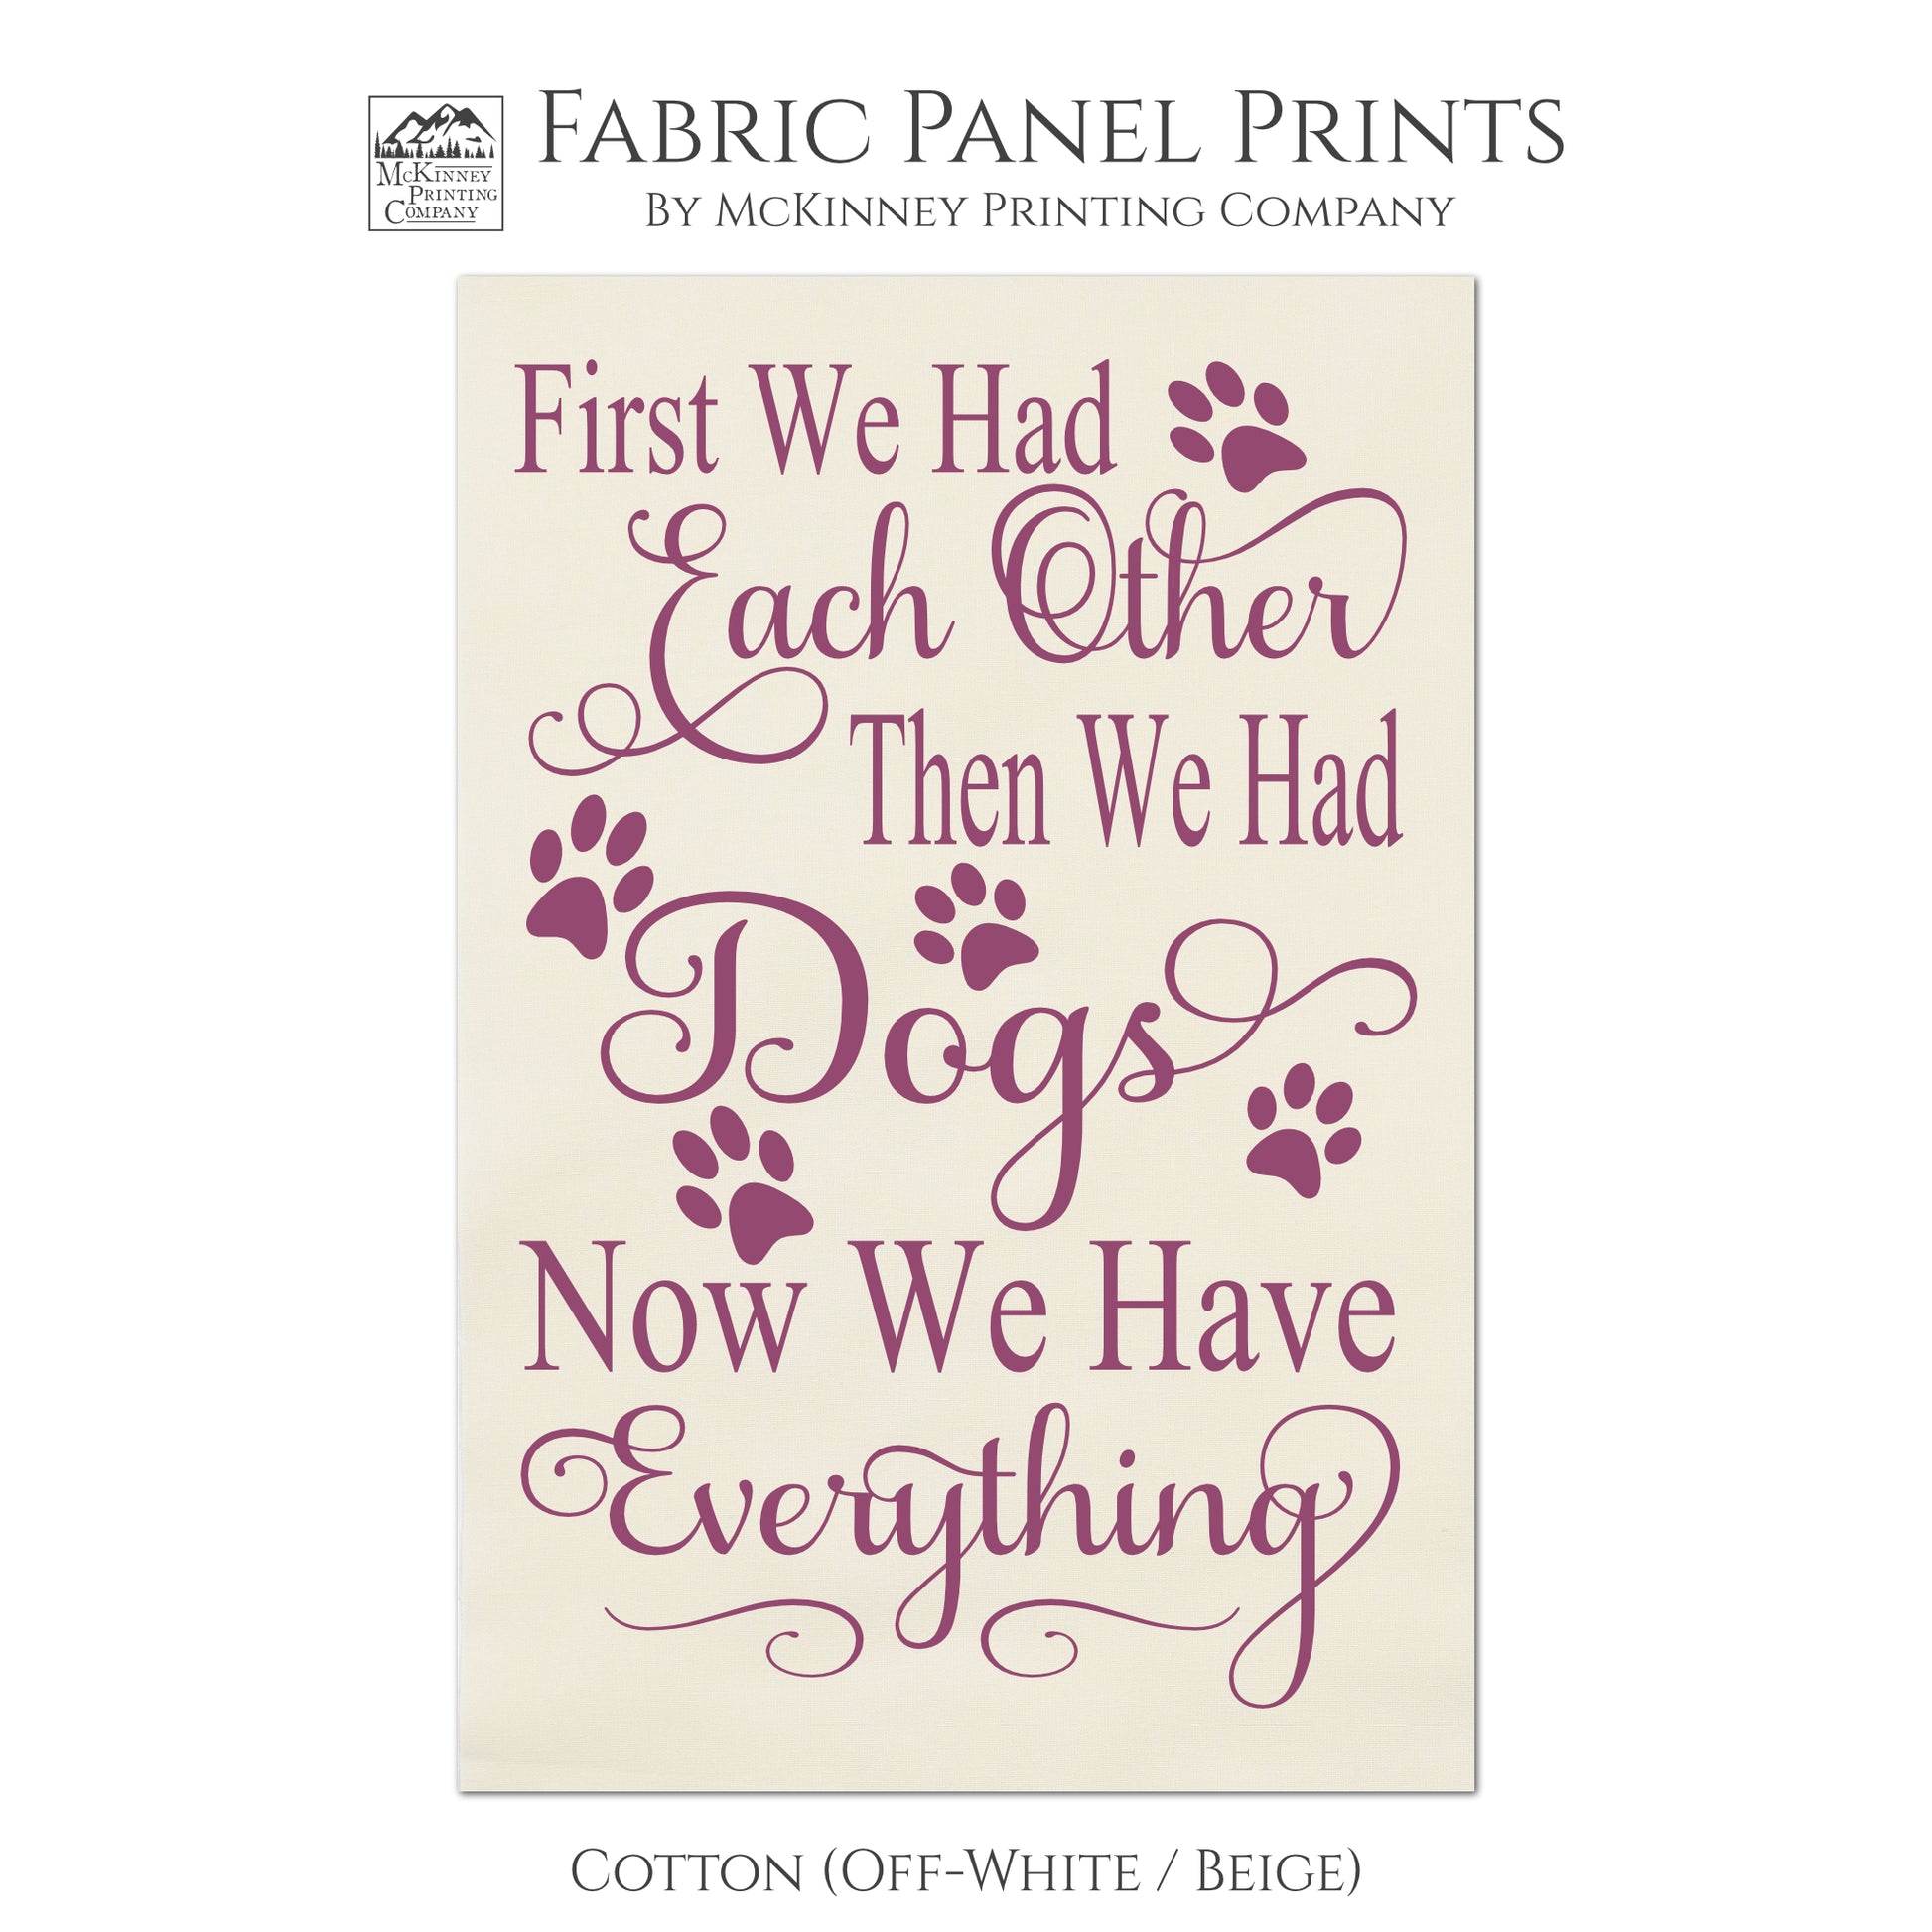 Dog Print Fabric - First we had each other, then we had Dogs. Now we have everything. Wall Art, Quilting, Quilt Block, Fabric Panels - Cotton